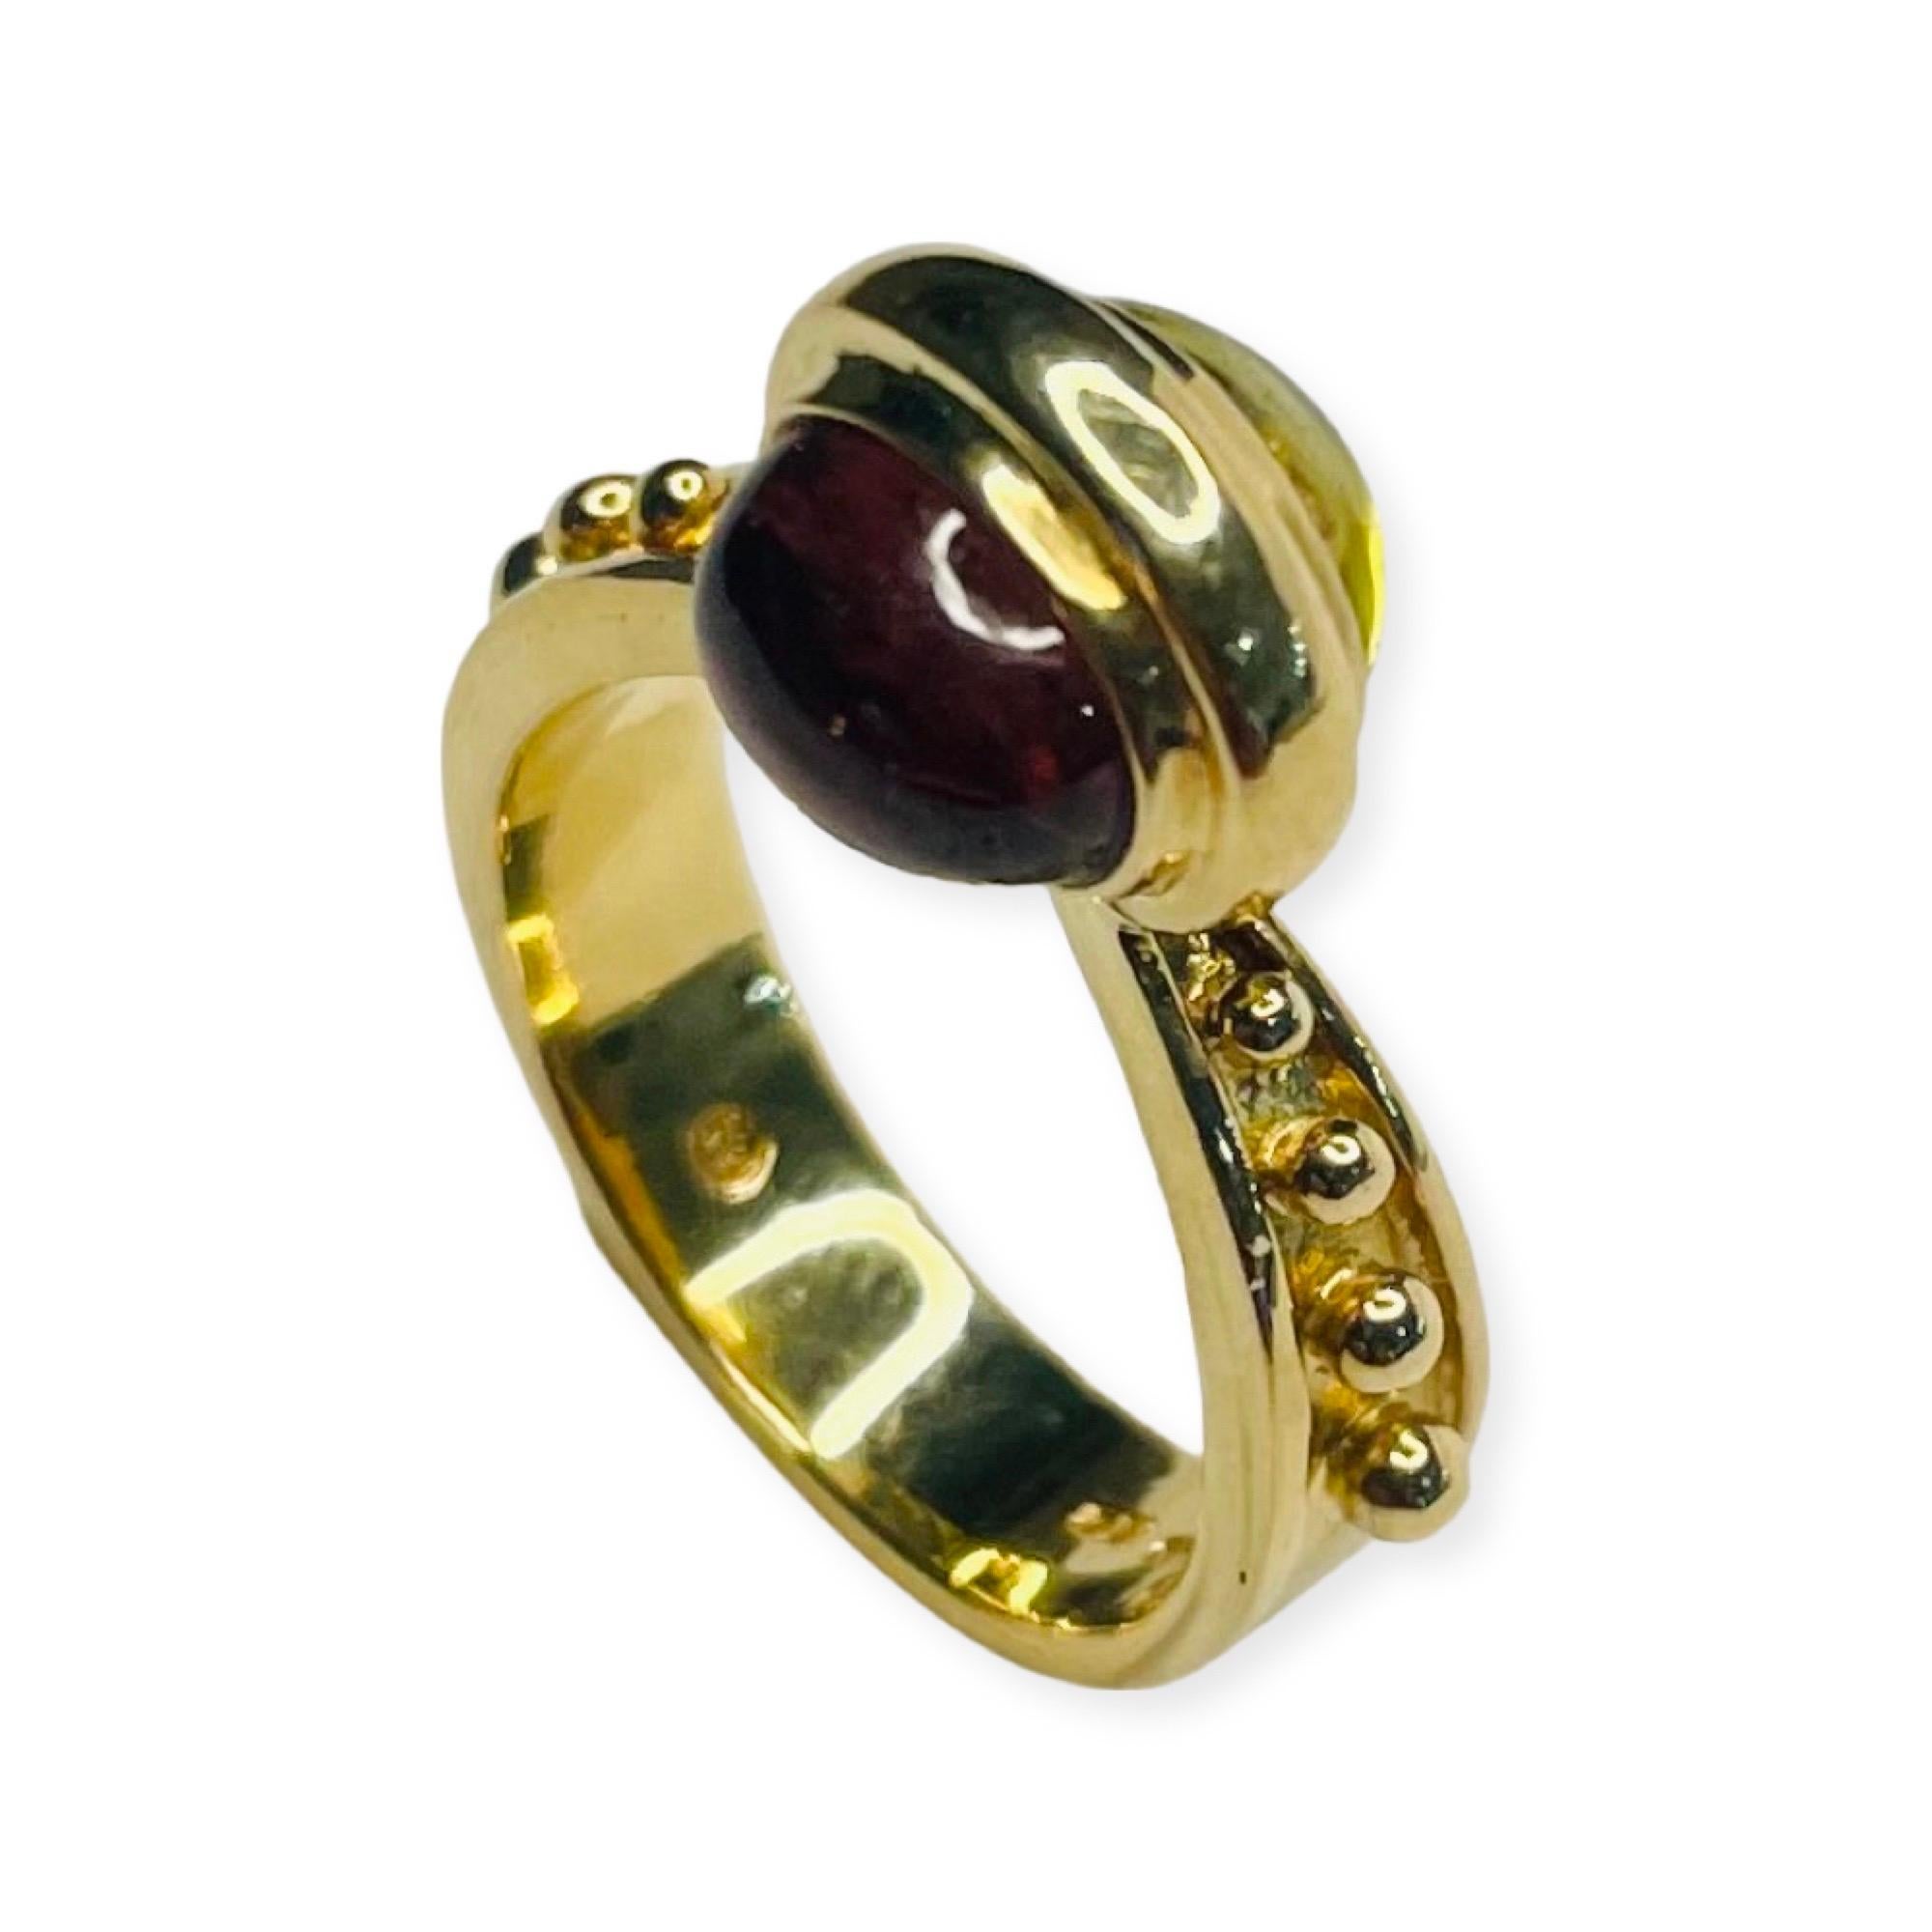 Kian 18K Yellow Gold Pink and Green Tourmaline Cabochon Ring. The top of the ring is 10.3 mm by 11.3 mm and 9.0 mm in height. The shank is 5.0 mm at the top and tapers to 2.5 mm at the base. It has Etruscan style balls on the sides of the shank. 